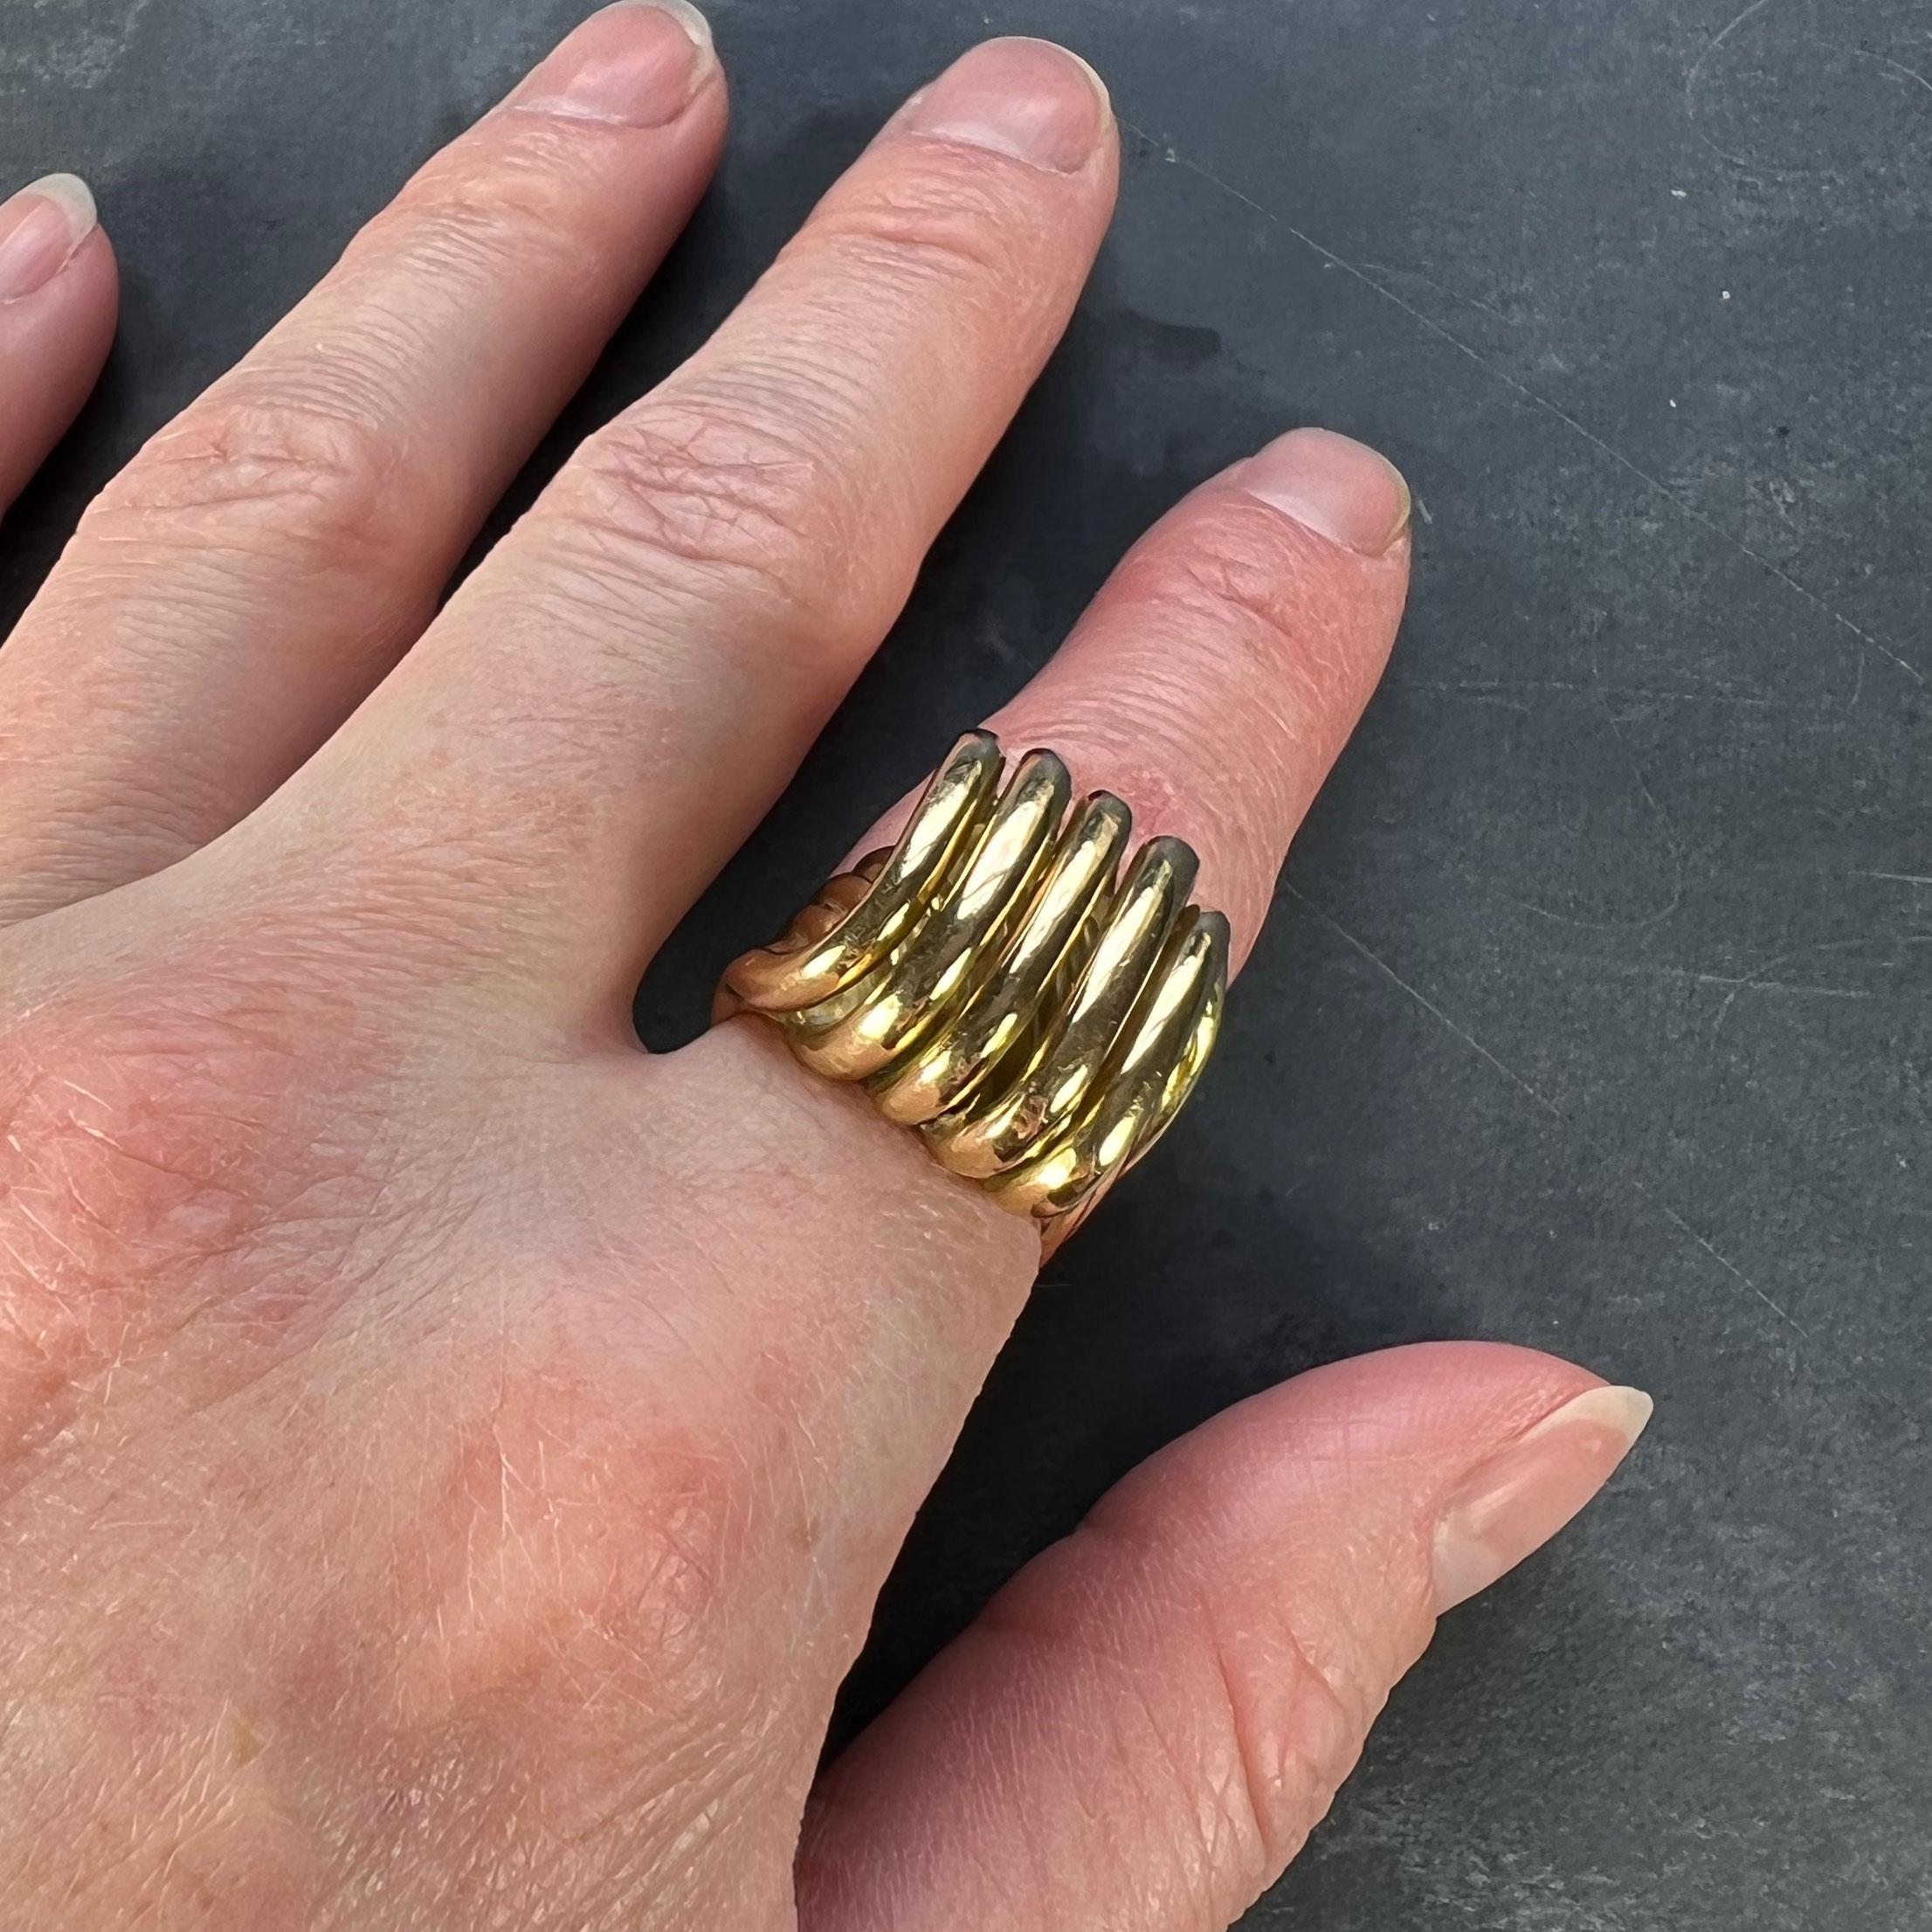 A heavy 18 karat (18K) yellow gold ring designed as a bold, three-dimensional, coiled spring in the Retro style. Stamped with the eagle mark for 18 karat gold and French manufacture.

Dimensions: 2.7 x 2 x 2 cm 
Weight: 25.36 grams.
Ring Size: K